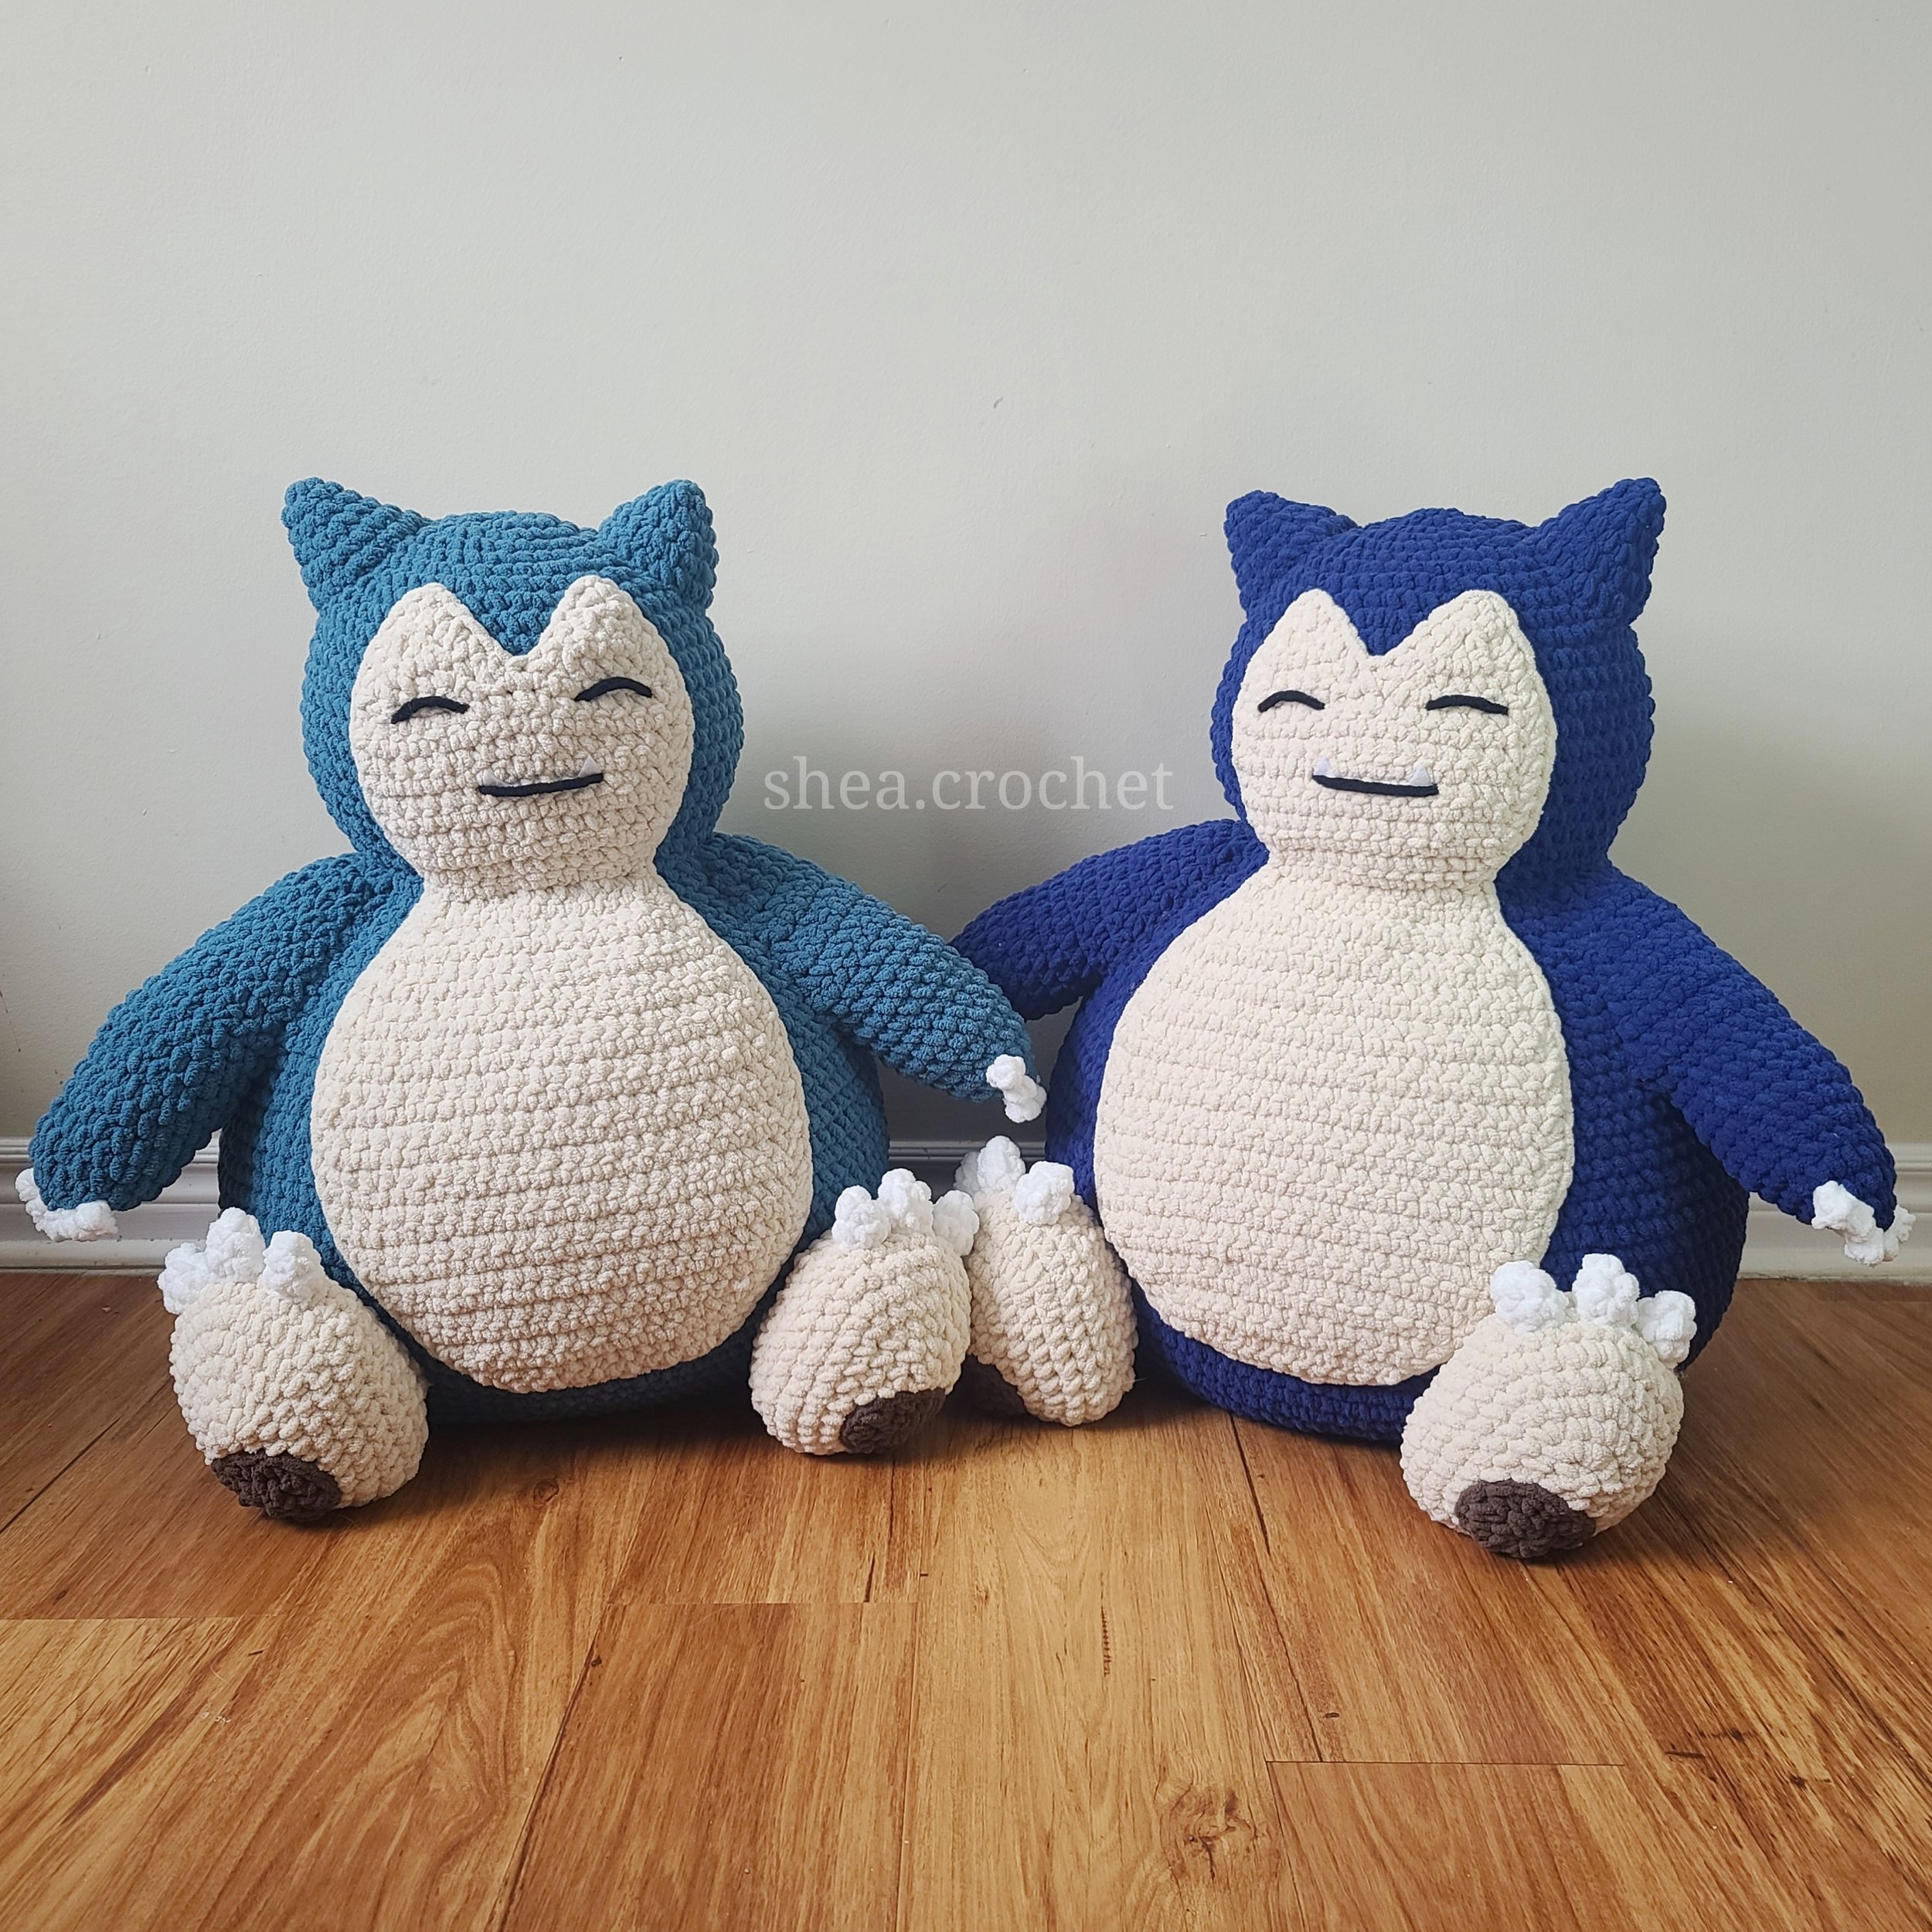 Pokémon Crochet Snorlax Kit: Kit includes everything you need to